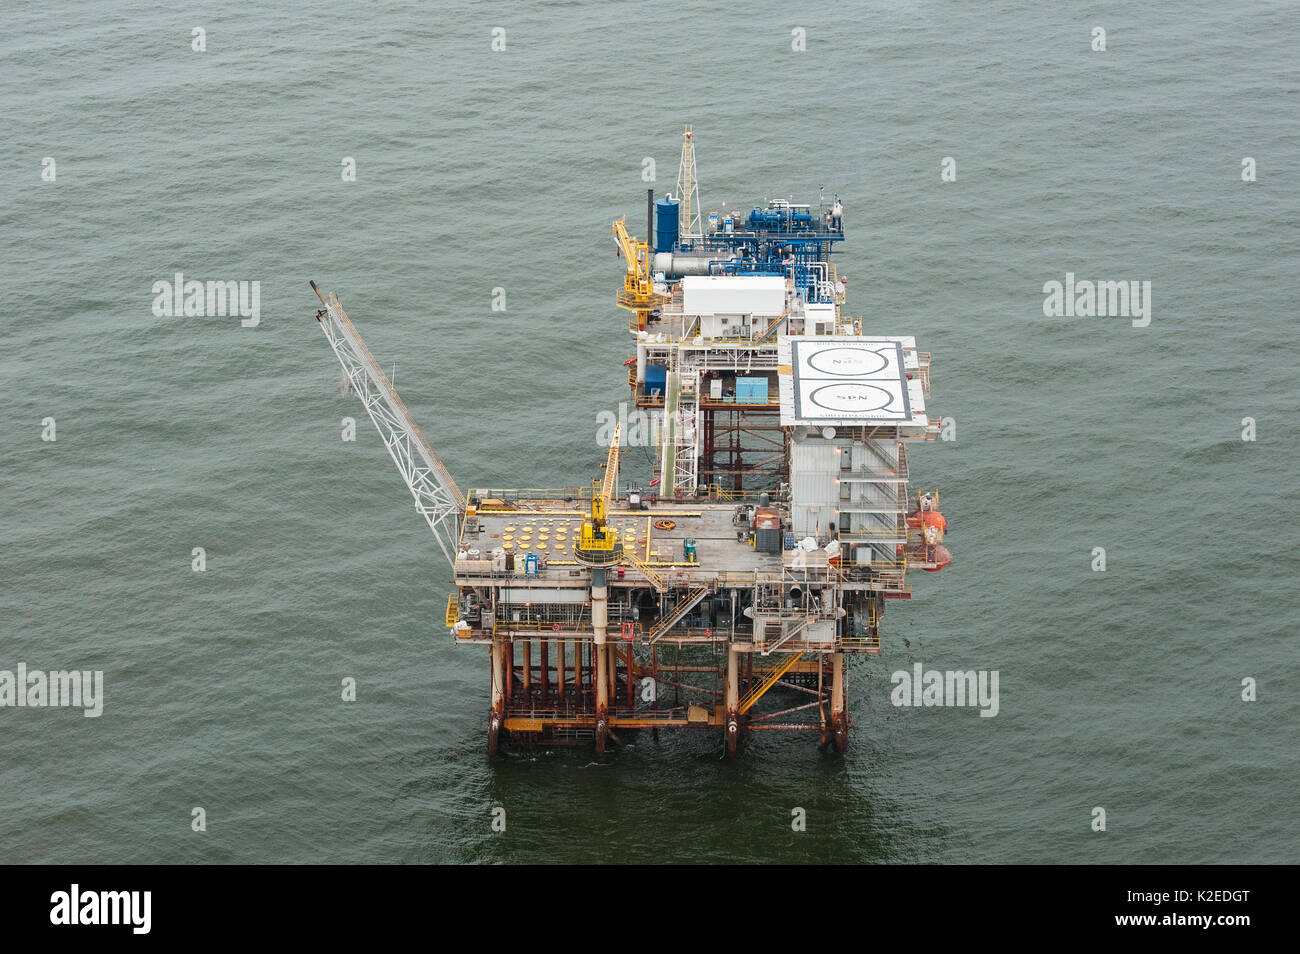 Aerial view of oil rig drilling platform,  Louisiana, Gulf of Mexico, USA 2010 Stock Photo